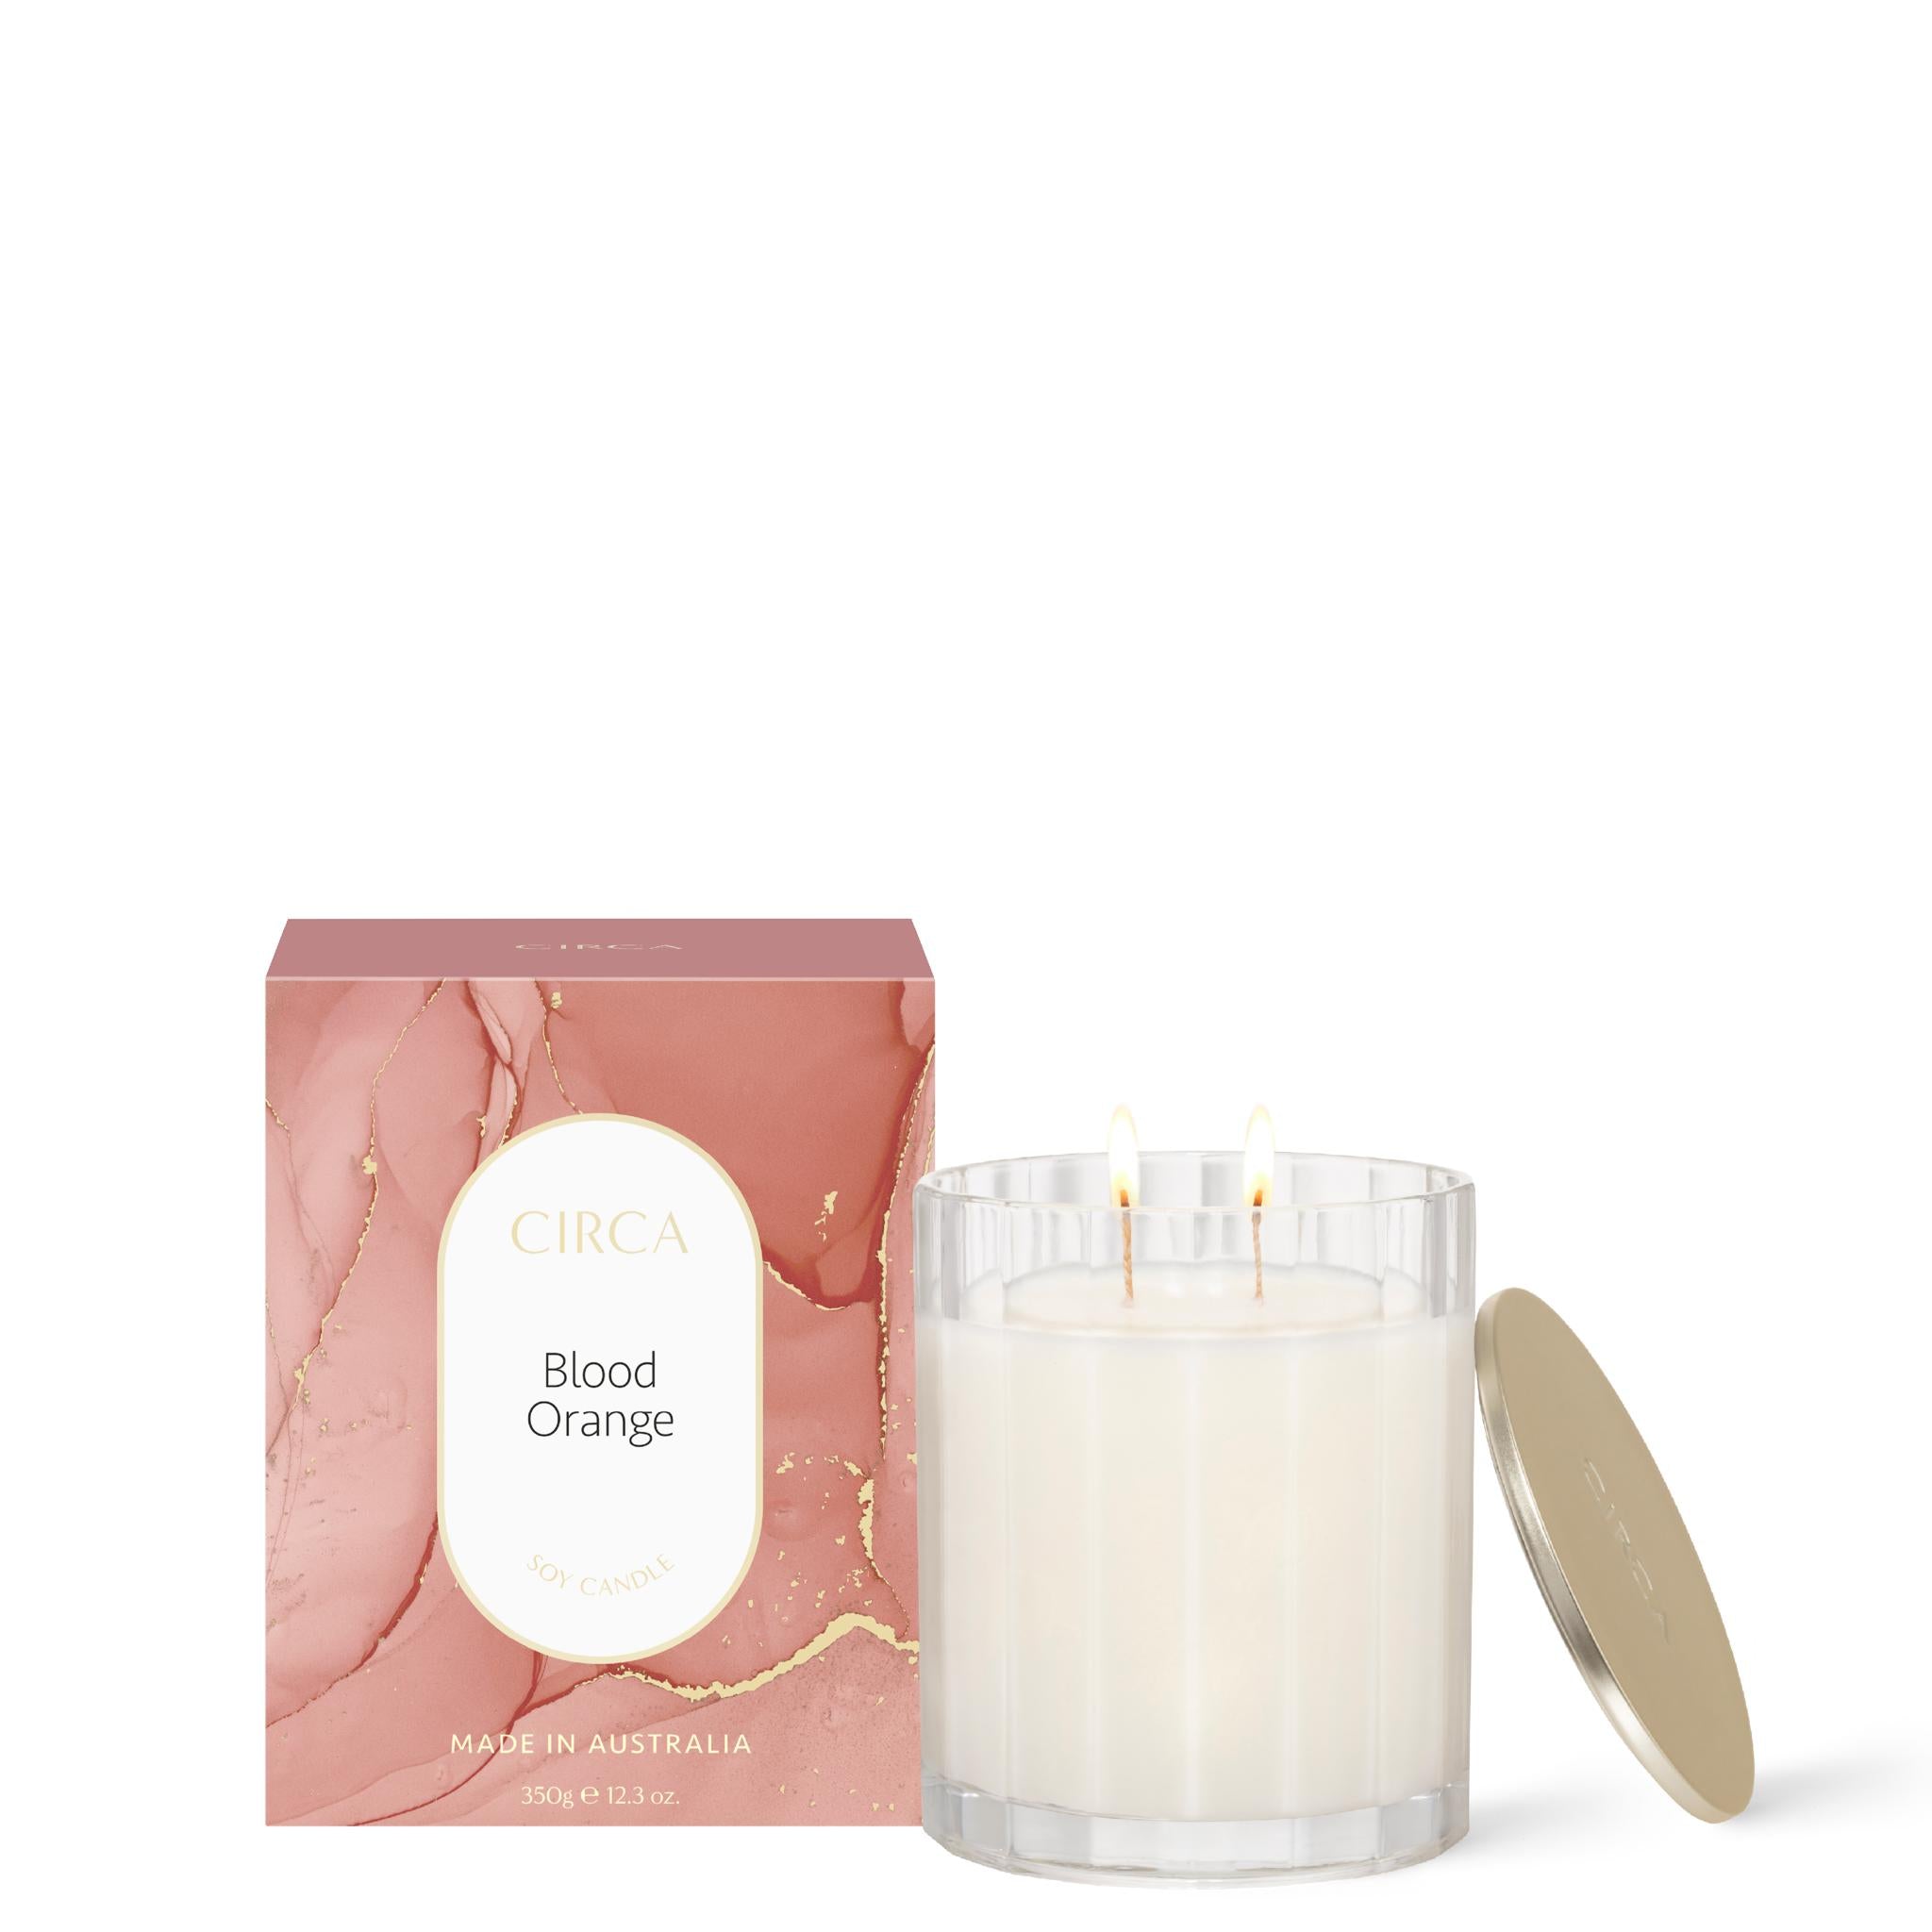 Soy Candle 350g - Asst Fragrance-Candles & Fragrance-Circa-Blood Orange-The Bay Room